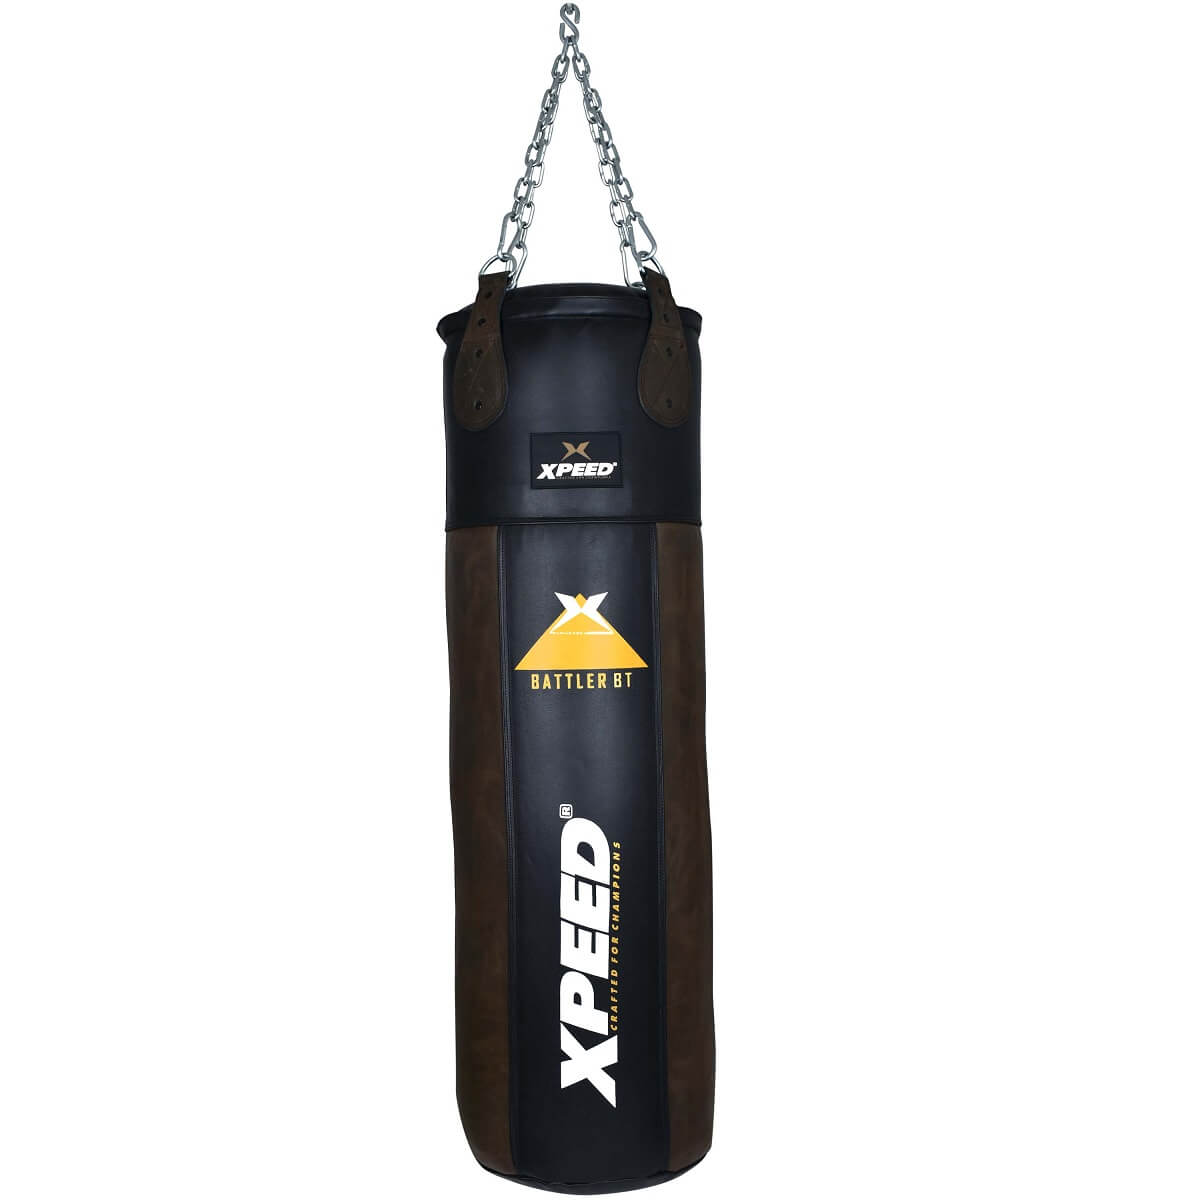 Discover more than 77 xpeed punching bag latest - esthdonghoadian